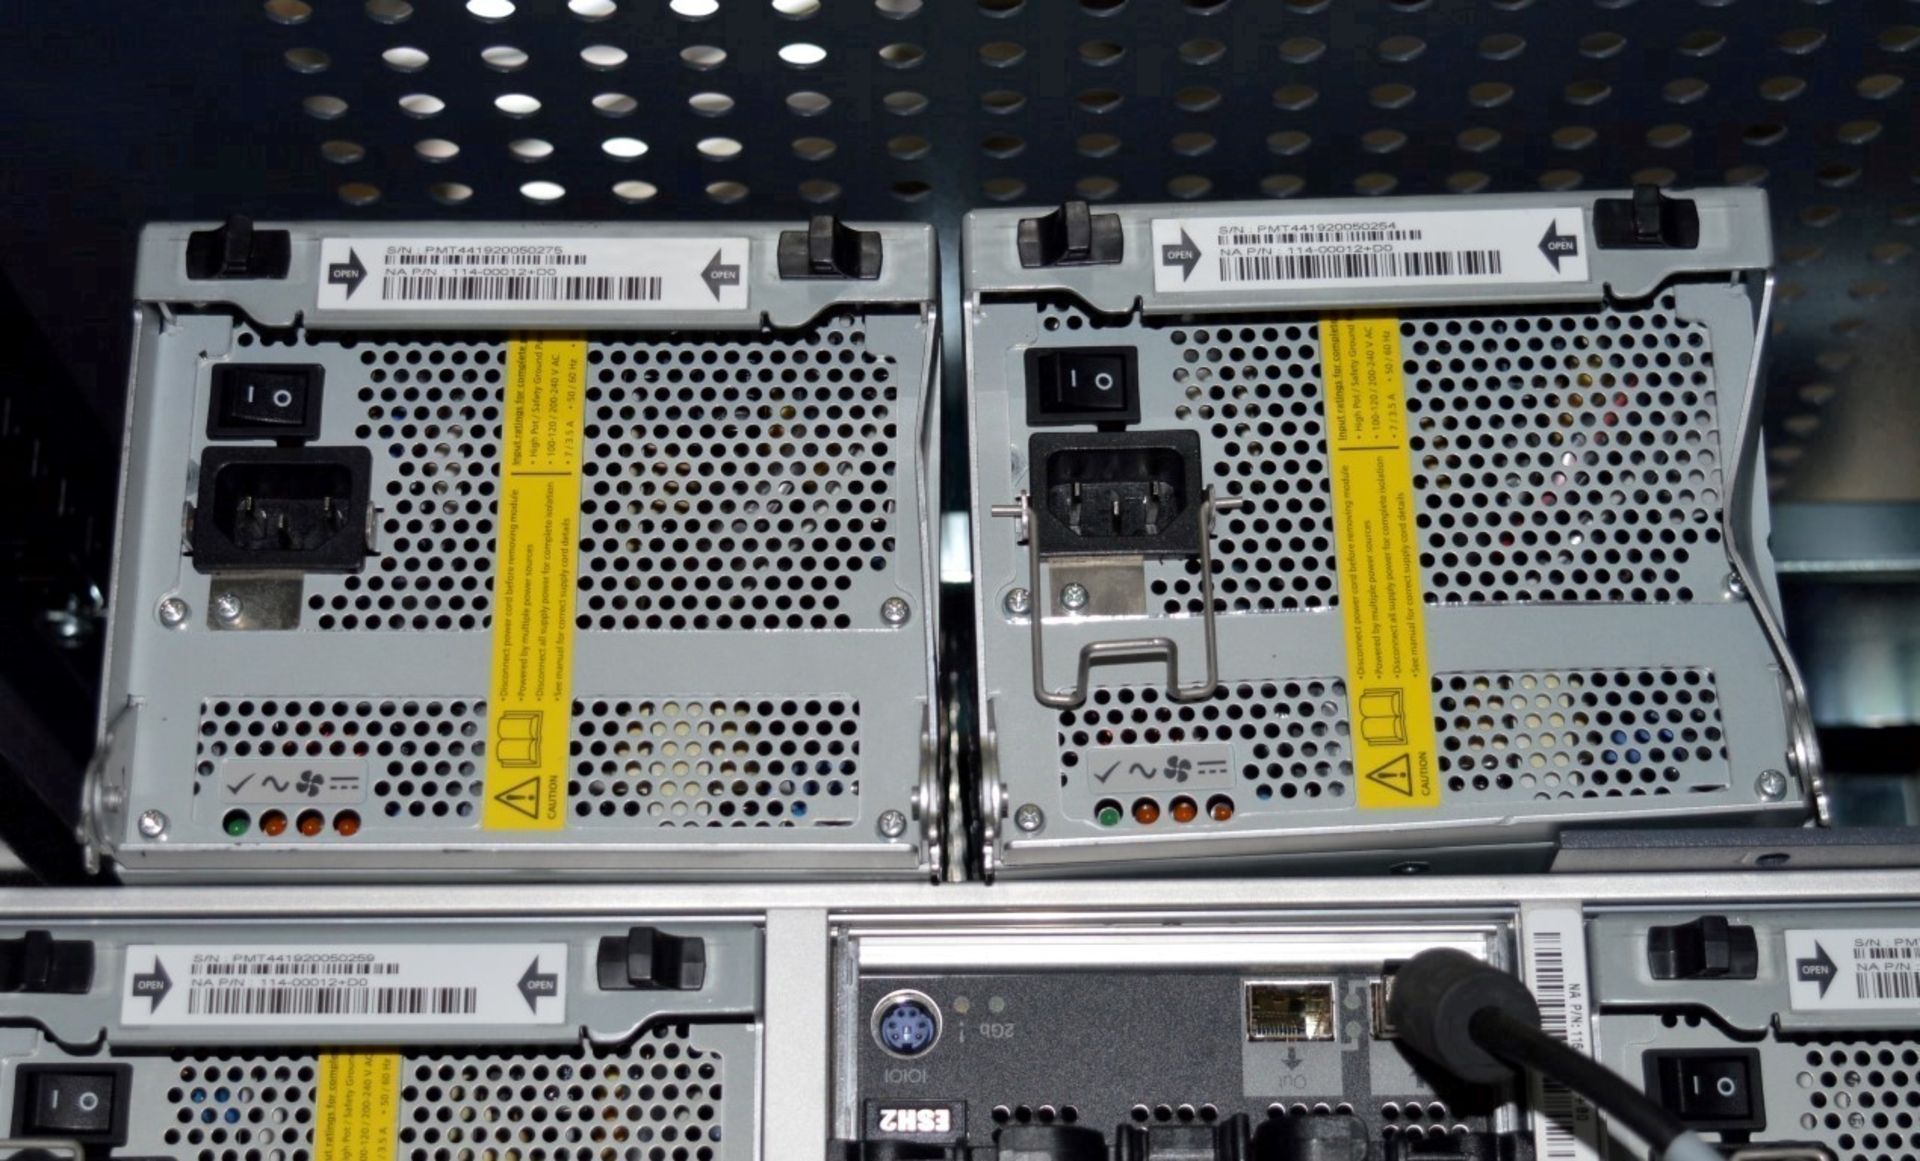 1 x Network Appliance Netapp Filer - Netapp Data Rack With 1 x FAS3140 Controller and 9 x DS14 MK2 - Image 4 of 23